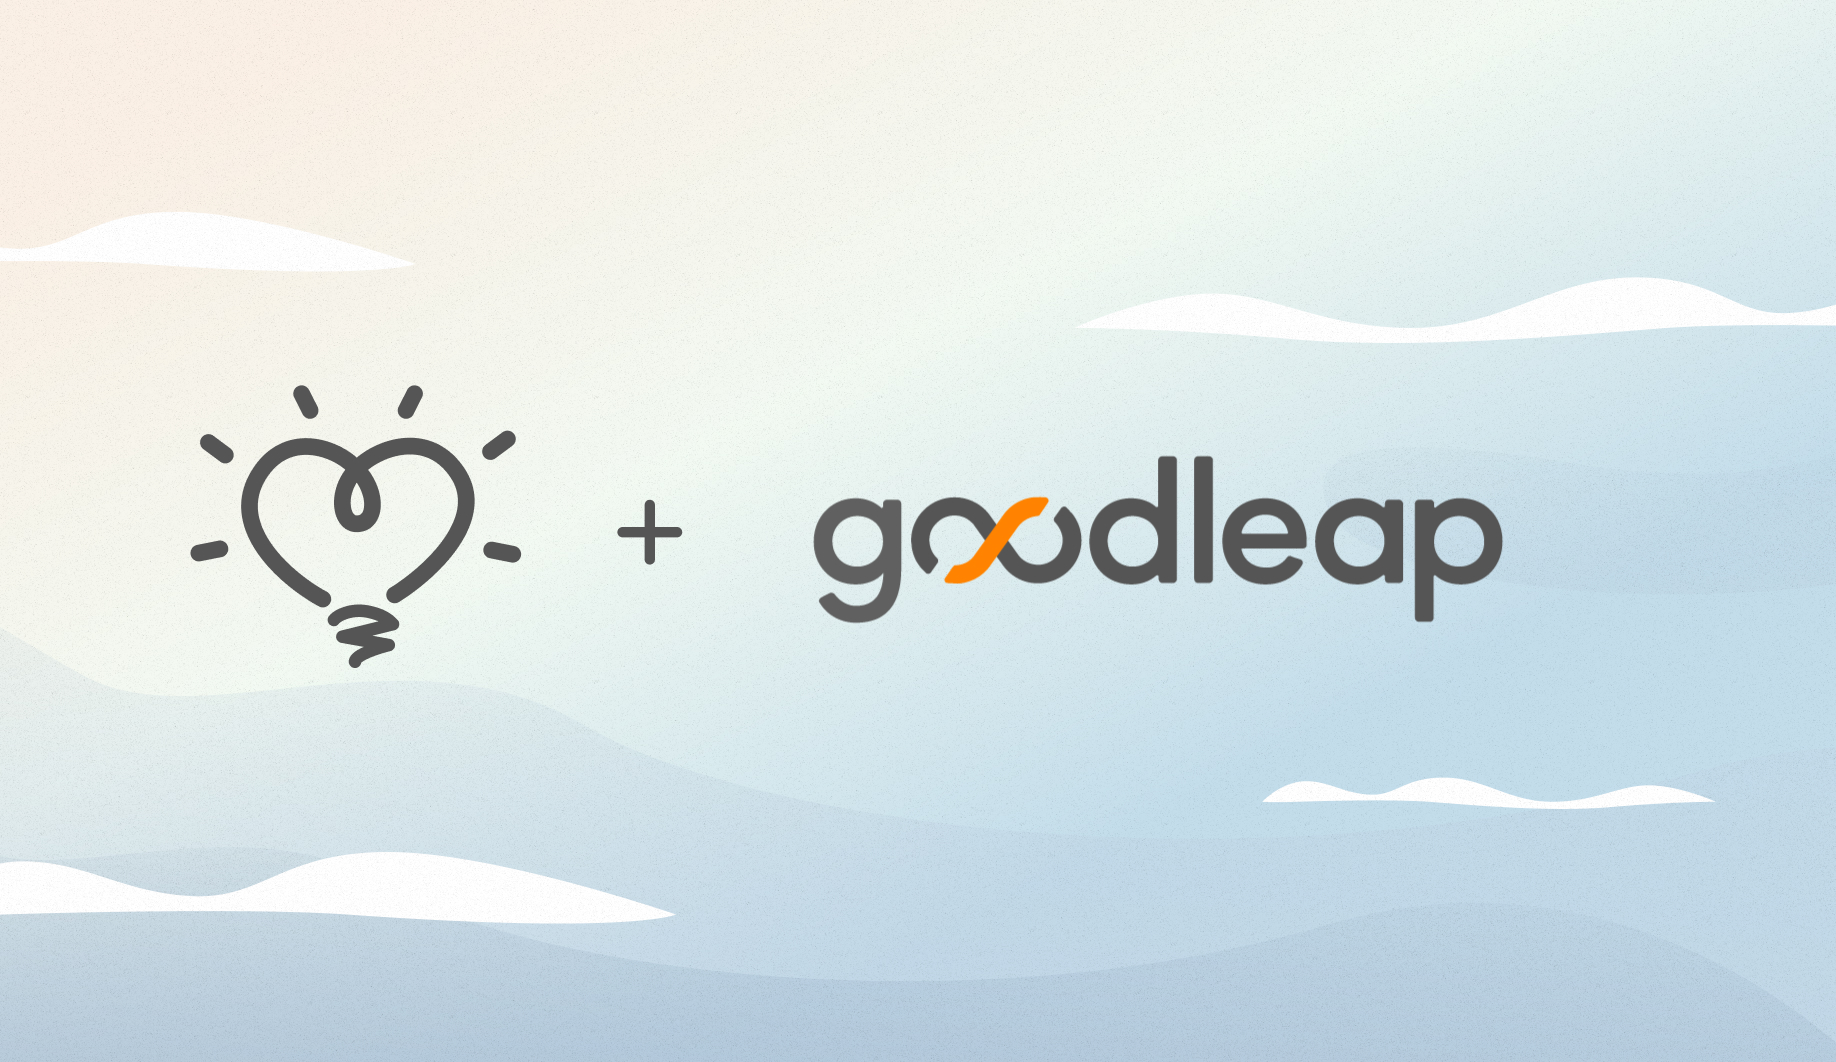 Monalee Partners with GoodLeap to Make Solar Energy Accessible to More Homeowners